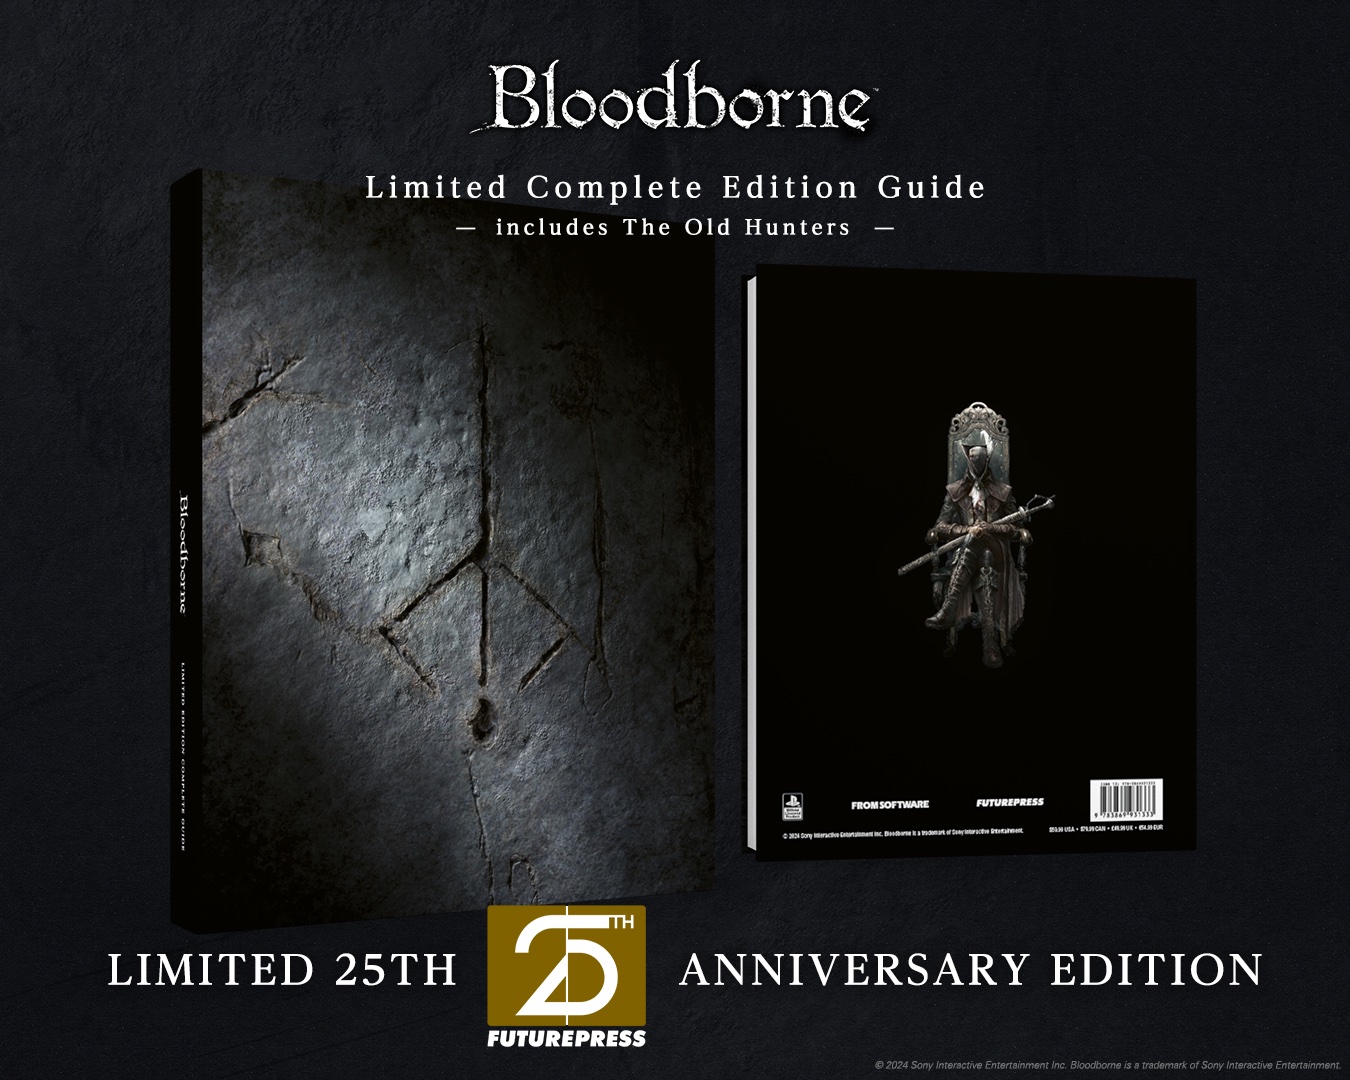 EAN : 9783869931333 - Bloodborne Complete Edition Guide 25th Anniversary